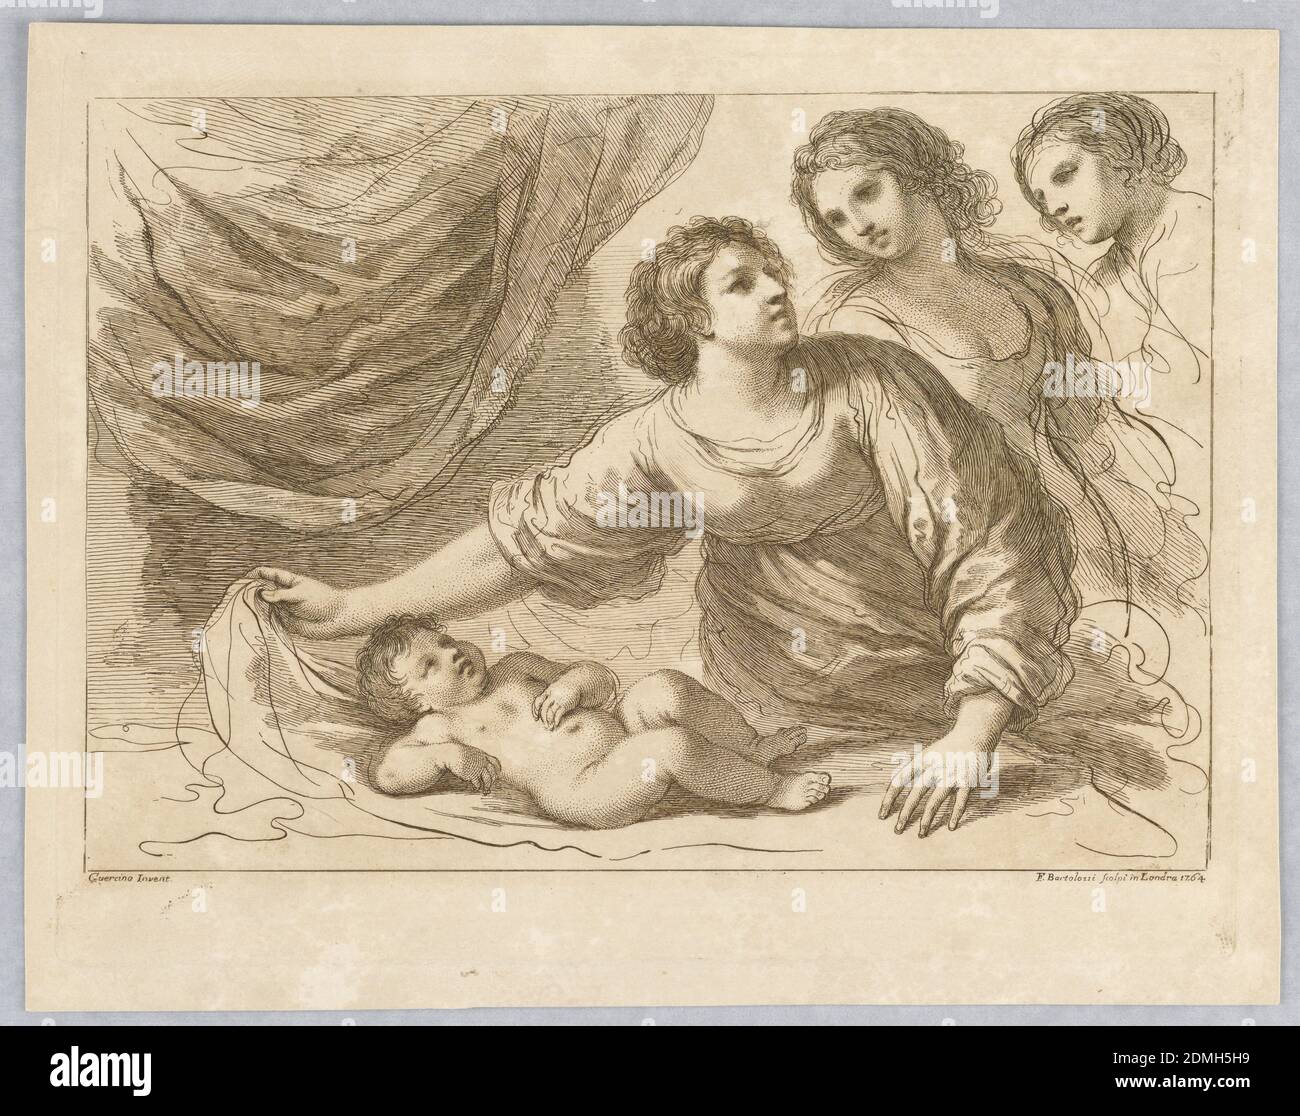 Three Women, with a Boy Lying Down, Francesco Bartolozzi, Italian, active England, 1727–1815, Giovanni Francesco Barbieri (called Guercino), Italian, 1591 – 1666, Engraving in brown ink on beige paper, The boy lying on a table or bed before a curtain. One woman is moving his covering, two others, to the right, look on. Below, the artists' names and place and date., Italy, England, 1764, Print Stock Photo